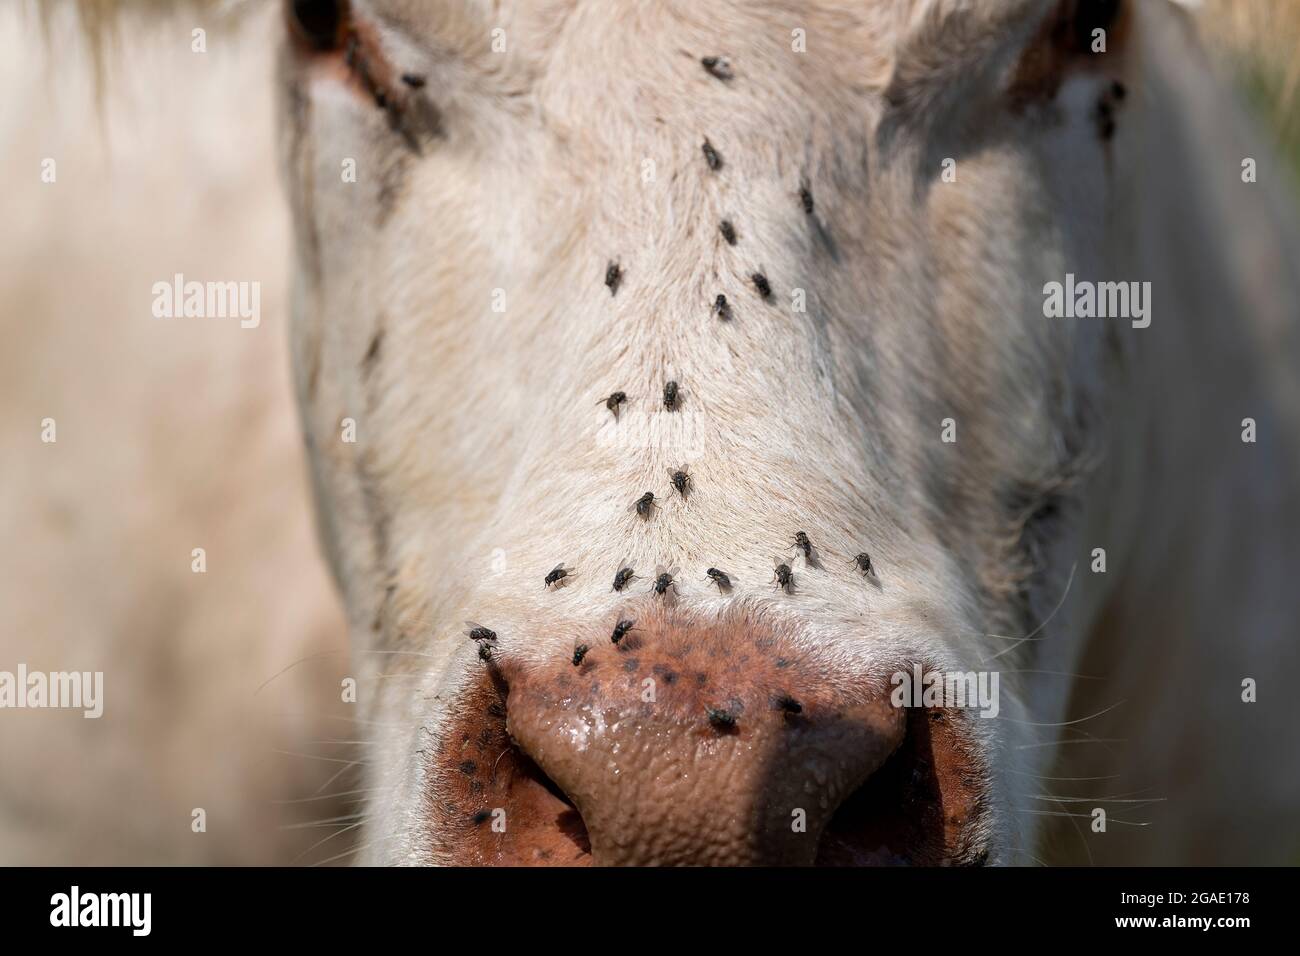 Cattle being bothered by flies on their faces during a hot summer. Yorkshire, UK. Stock Photo